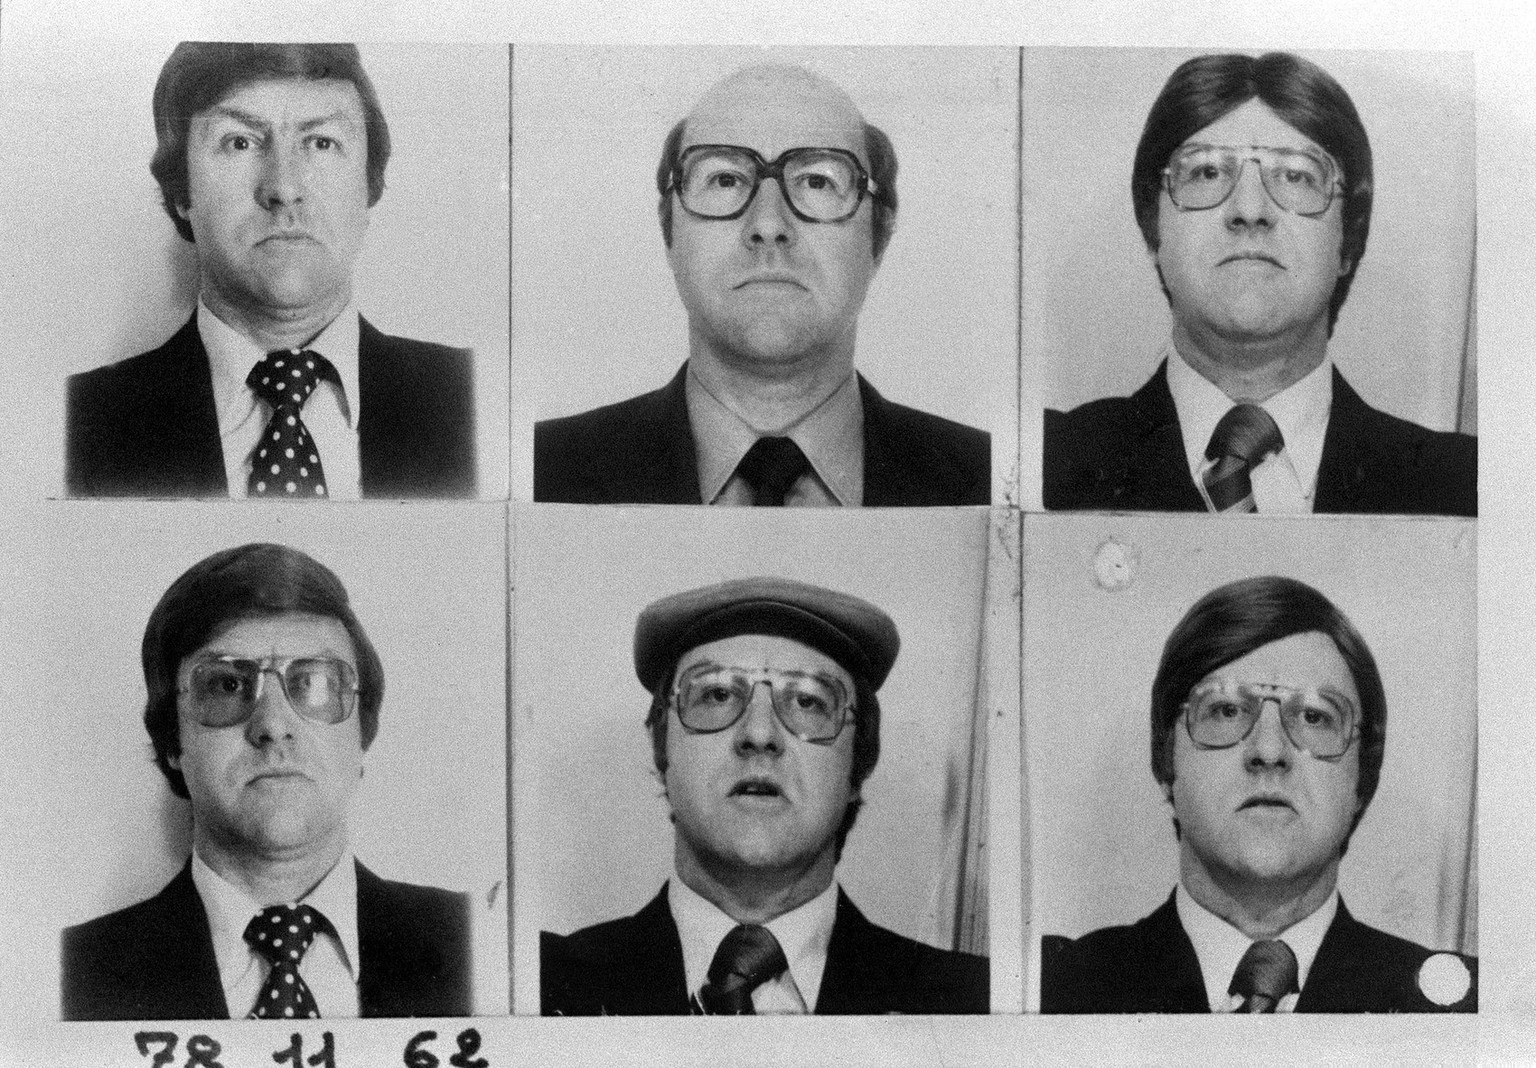 FRANCE - NOVEMBER 06: Portraits of the criminal Jacques Mesrine in France on November 06th, 1978. (Photo by Jean-Claude FRANCOLON/Gamma-Rapho via Getty Images)